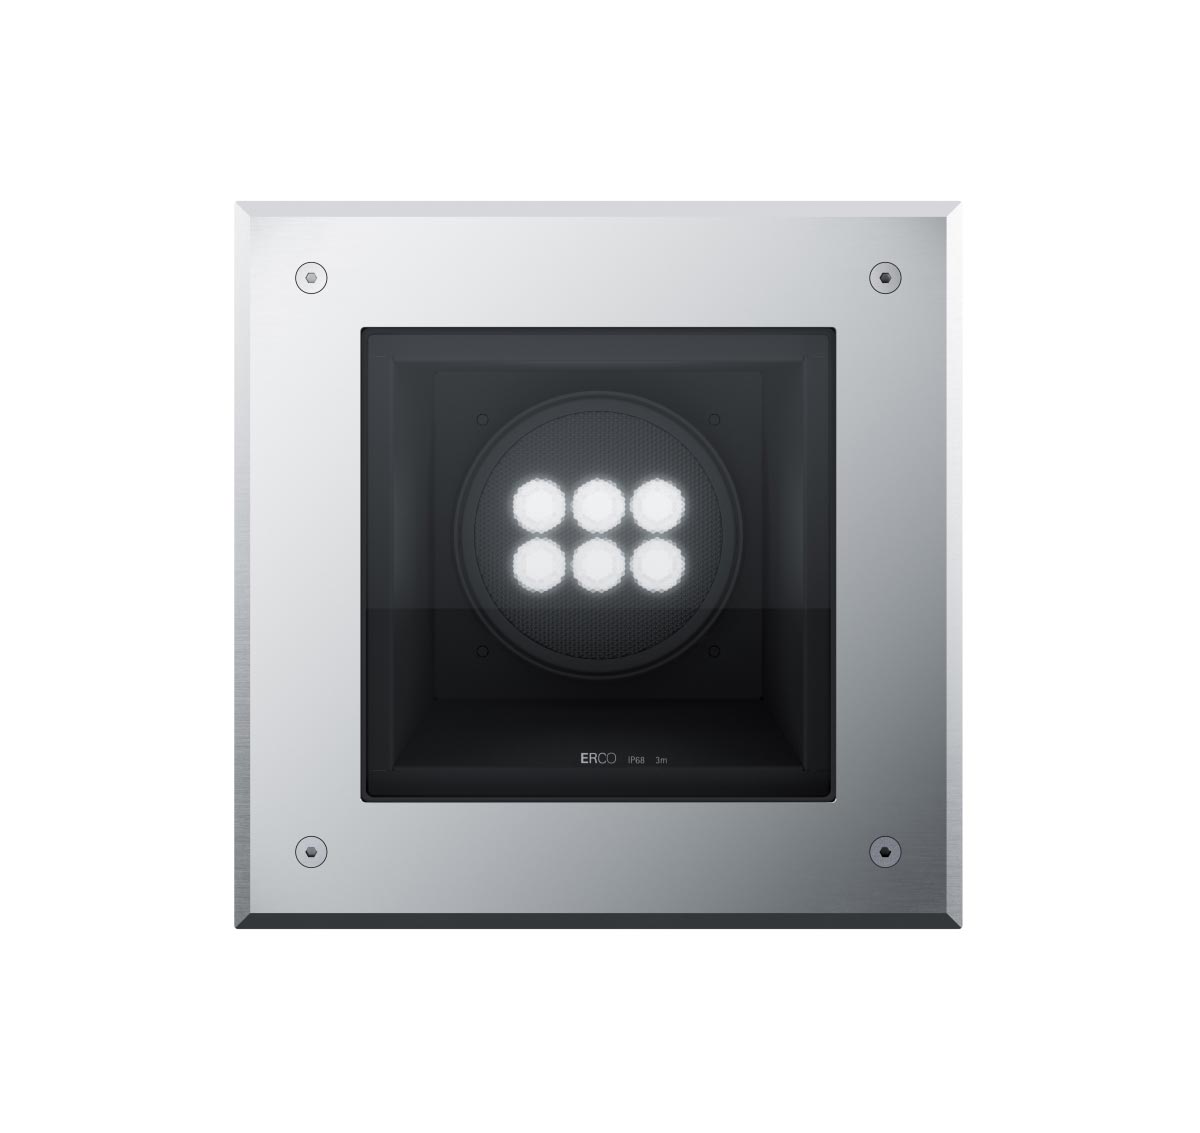 Tesis Square In-Ground Directional Luminaire